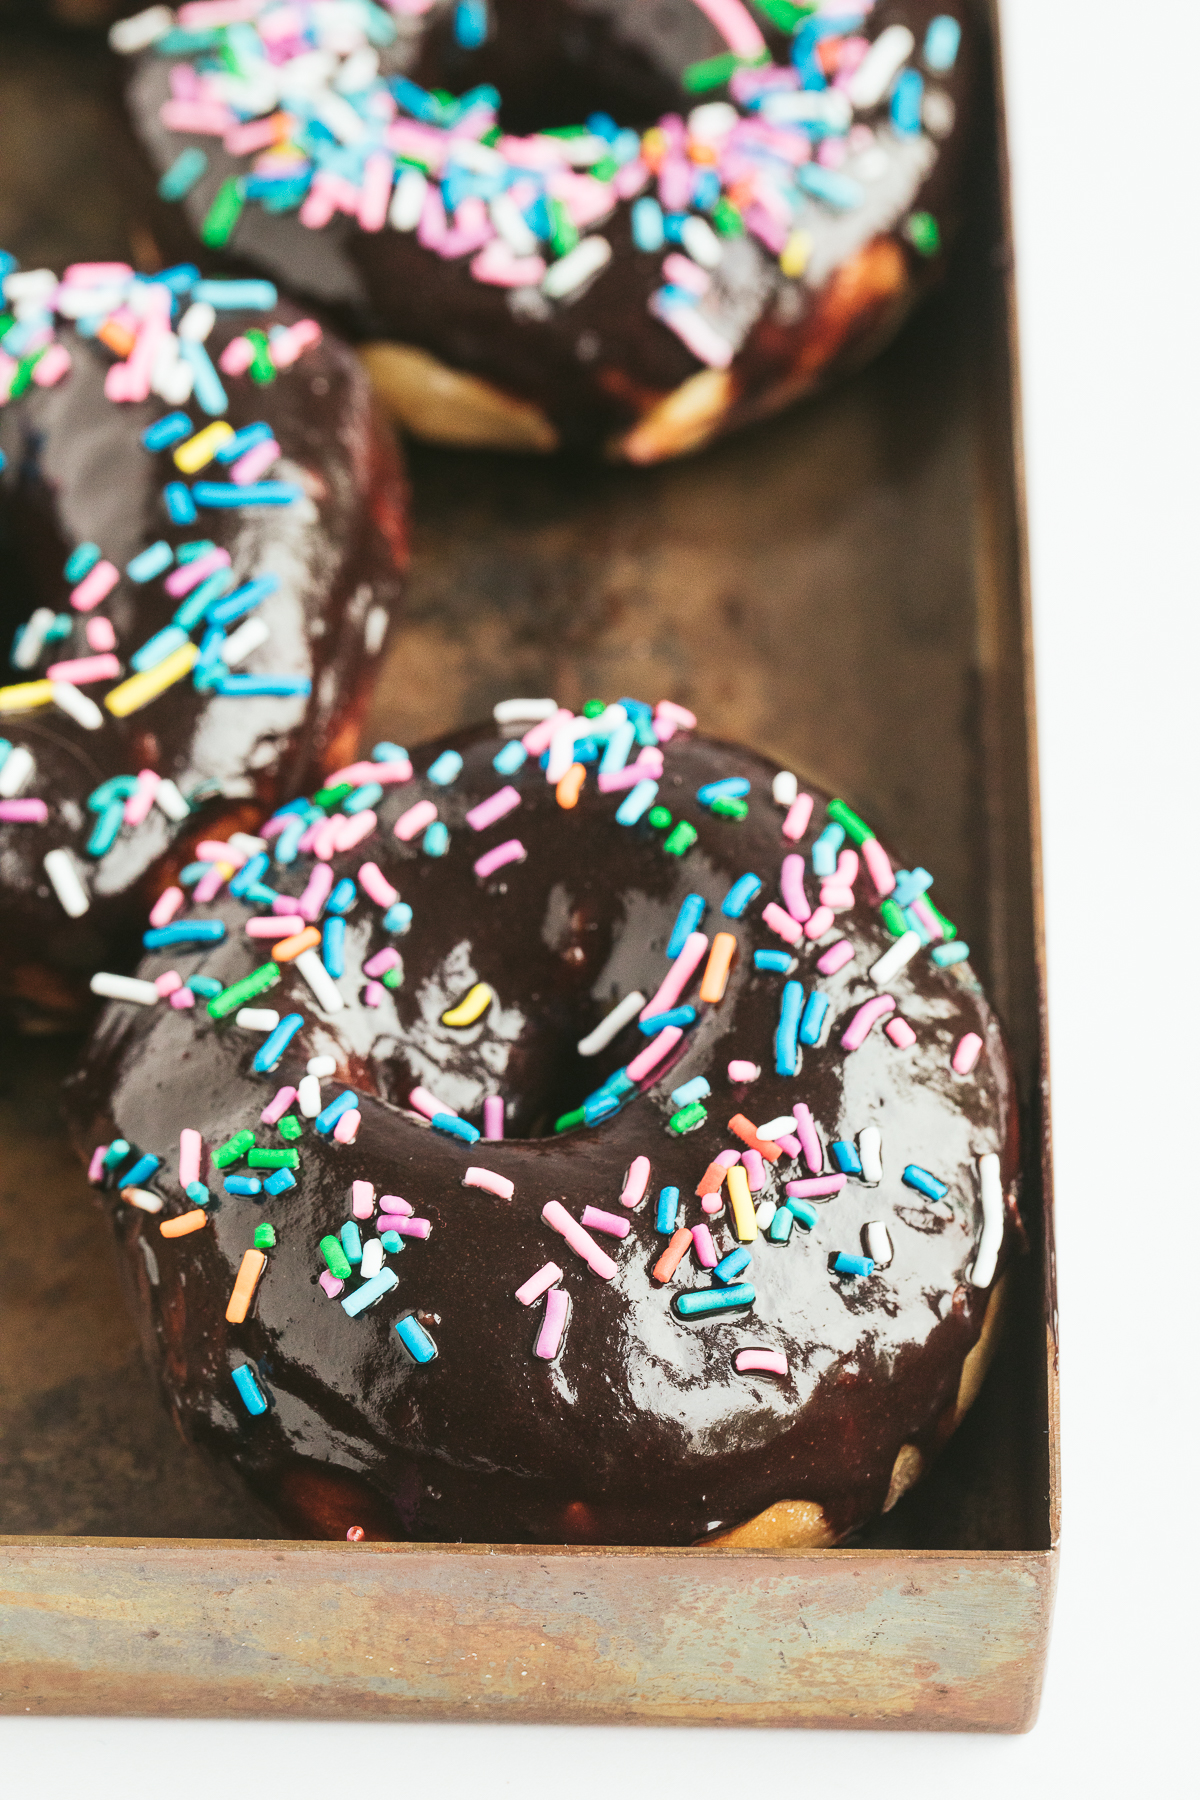 chocolate glazed donuts topped with colorful sprinkles